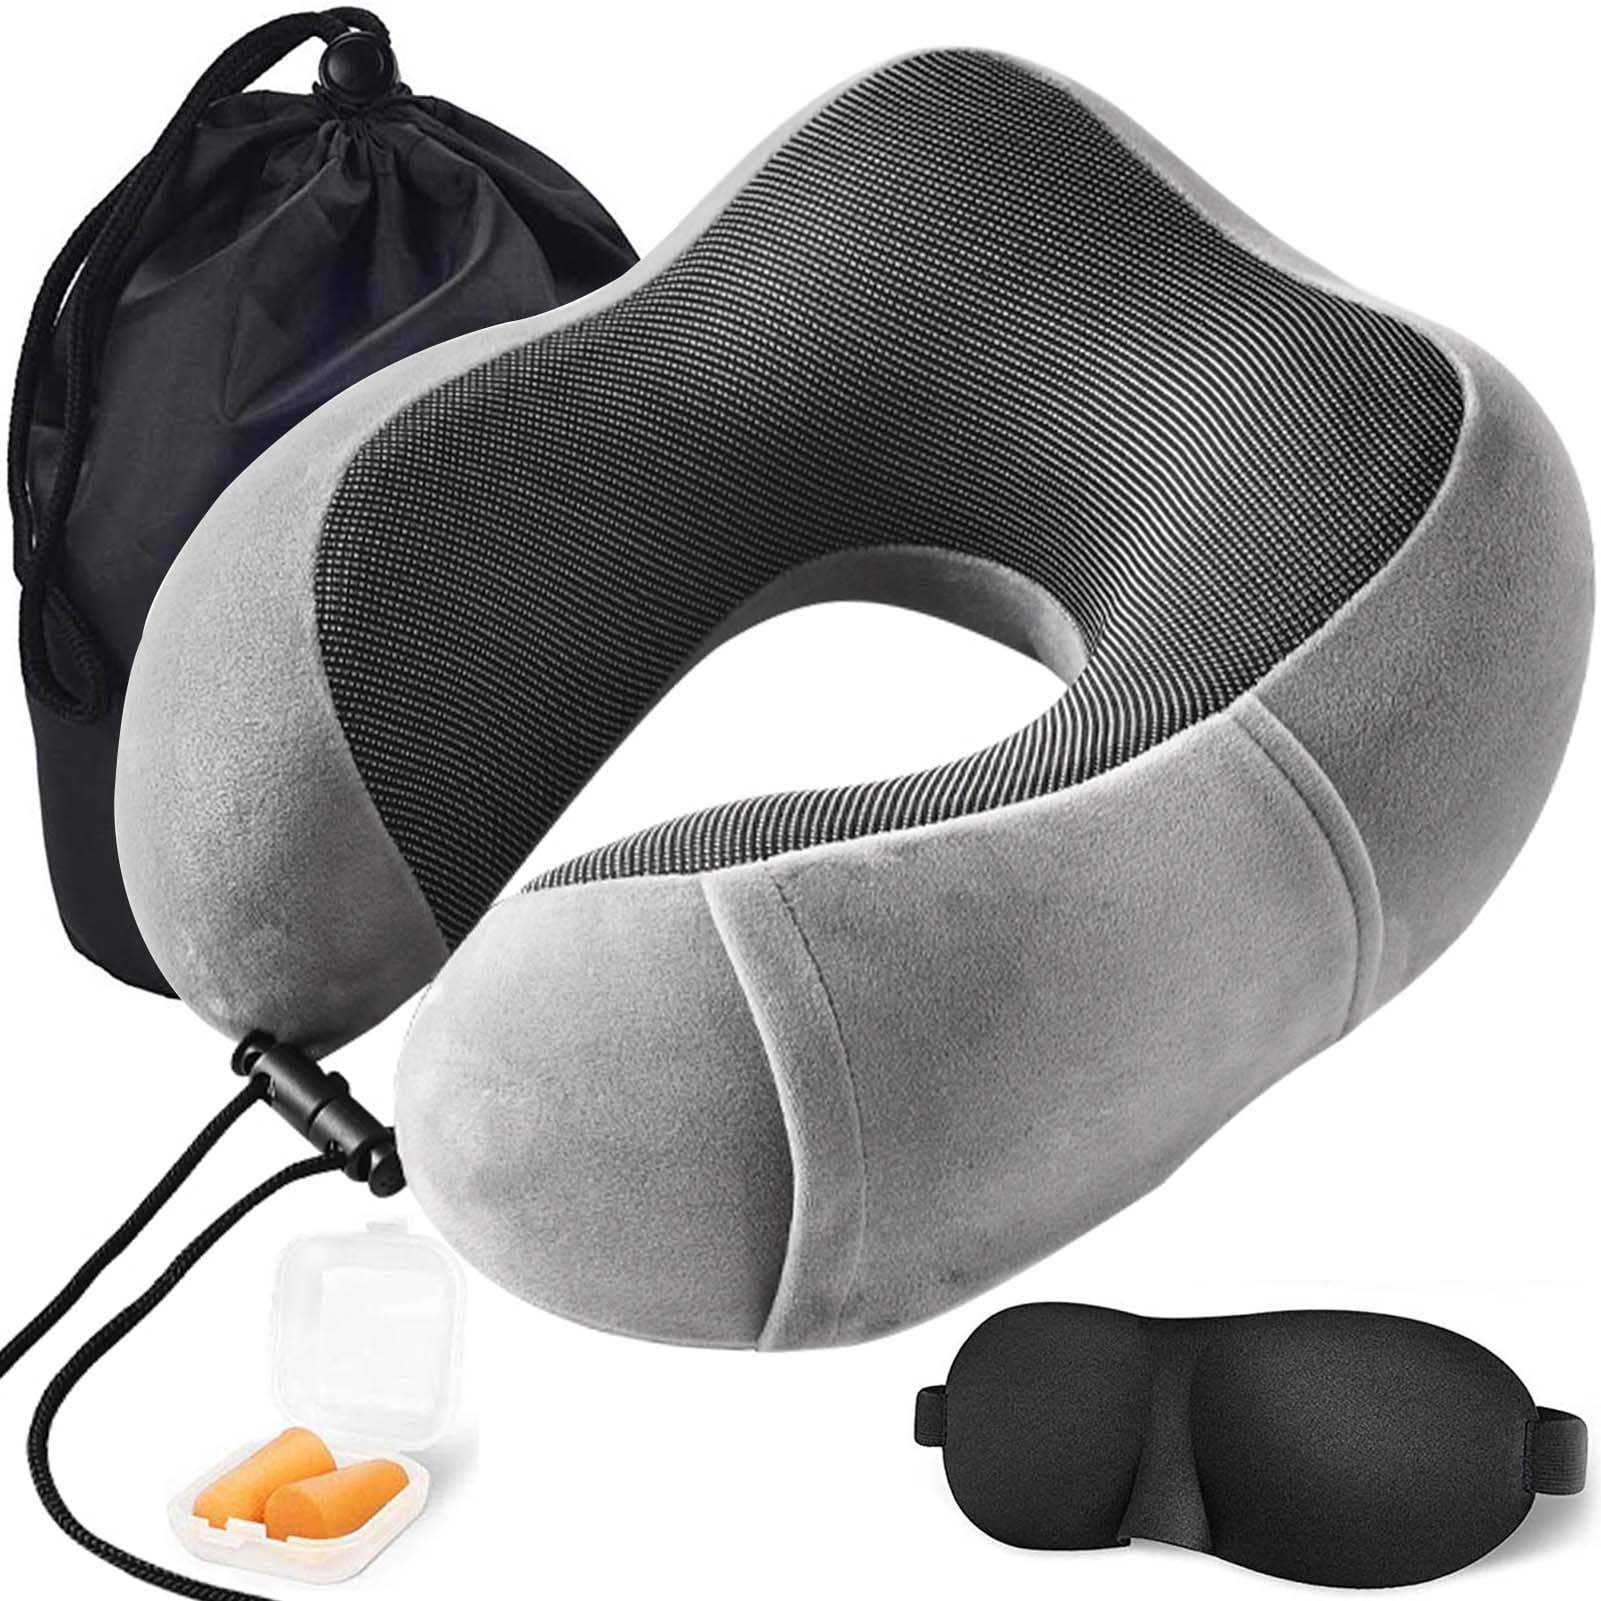 Portable & Breathable & Washable Traveling Pillow with Carry Bag Memory Foam Neck Pillow for Airplane Train Car Flight Pillows Travel Kit Black Eye Mask and Ear Plugs Fnova Travel Pillow